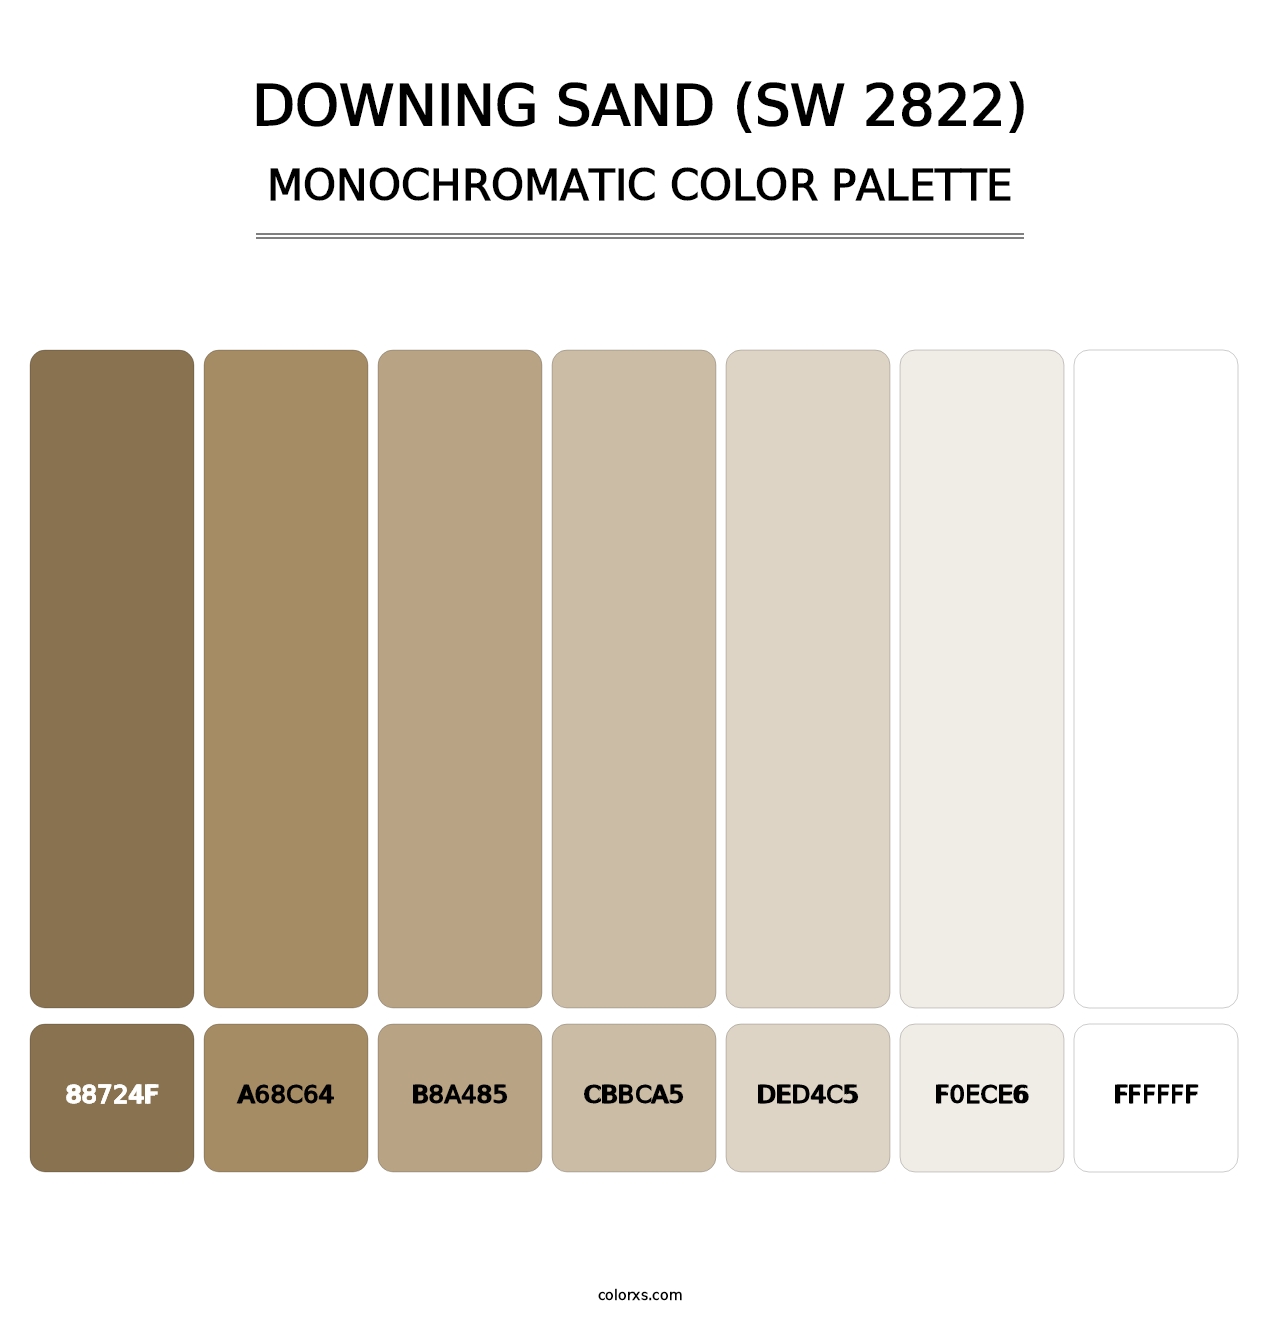 Downing Sand (SW 2822) - Monochromatic Color Palette